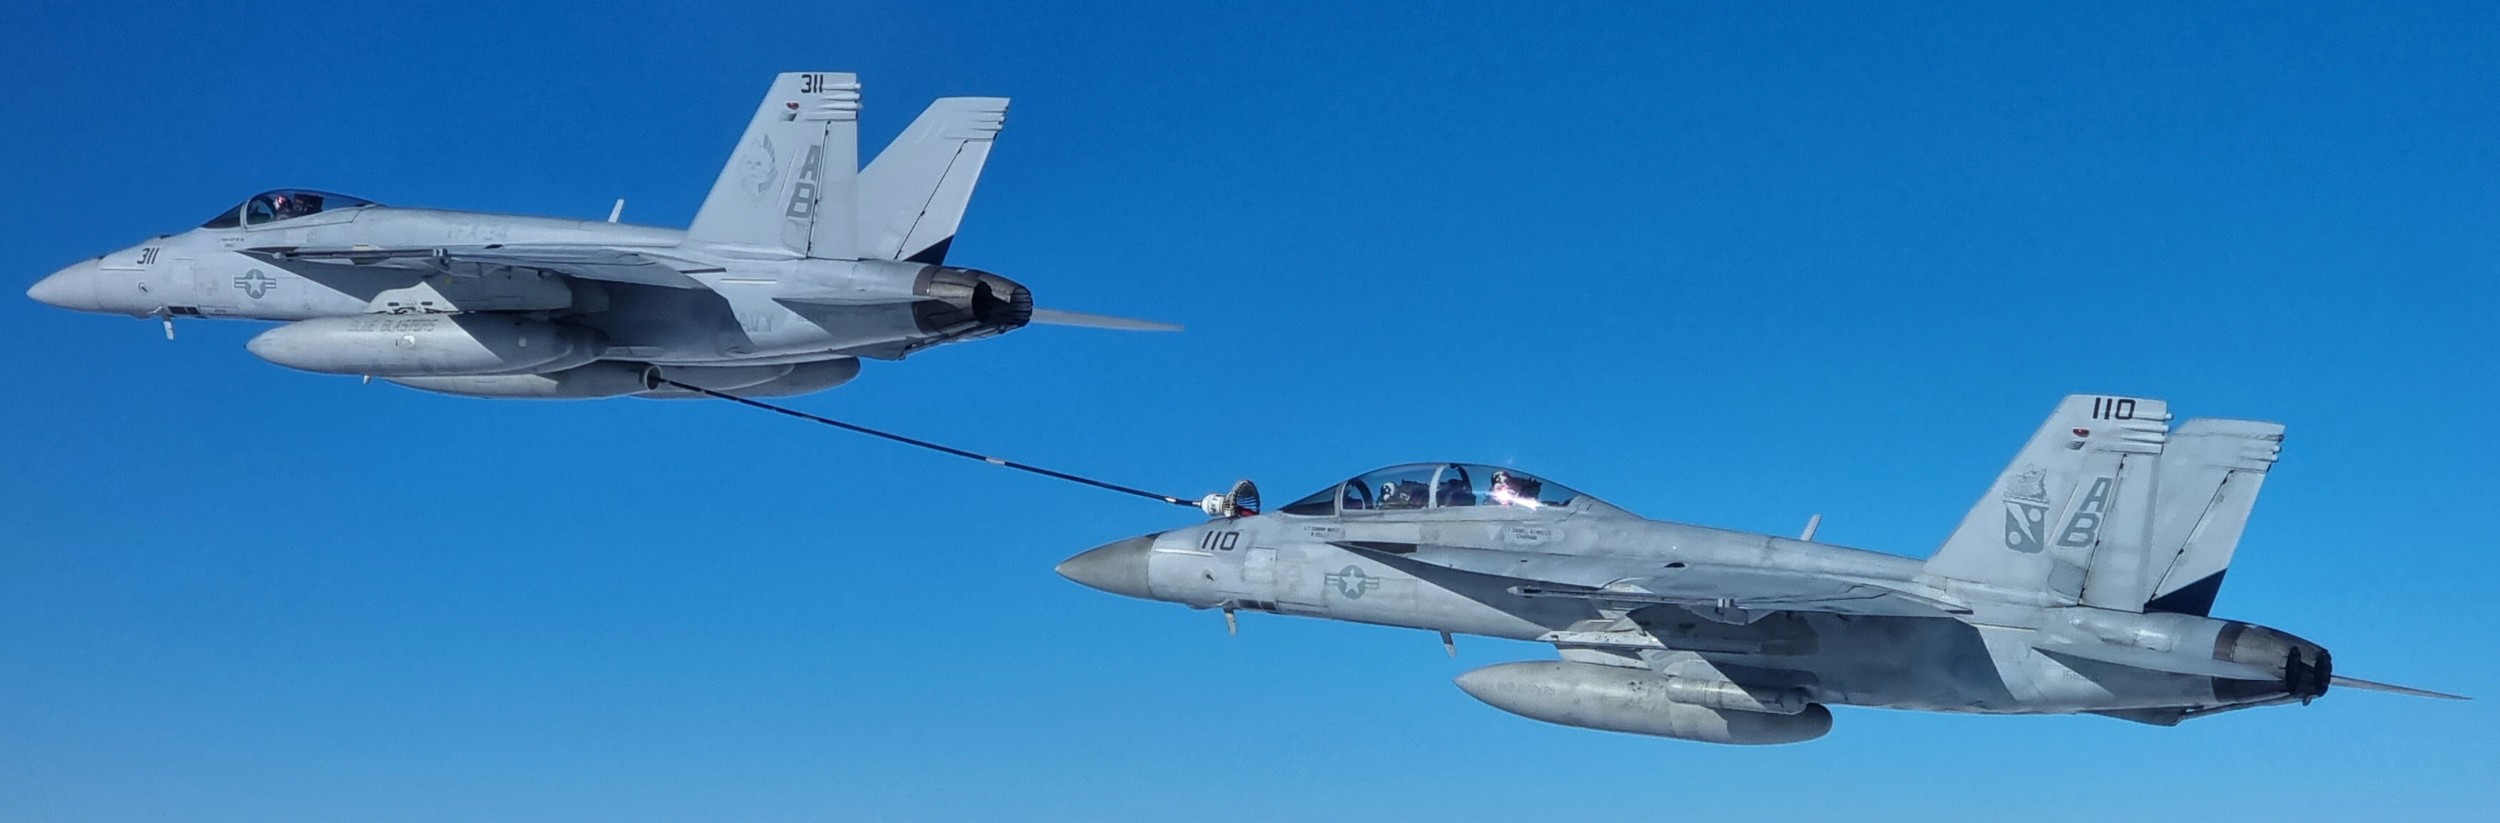 vfa-11 red rippers strike fighter squadron us navy f/a-18f super hornet uss harry s. truman cvn-75 inflight refueling 107